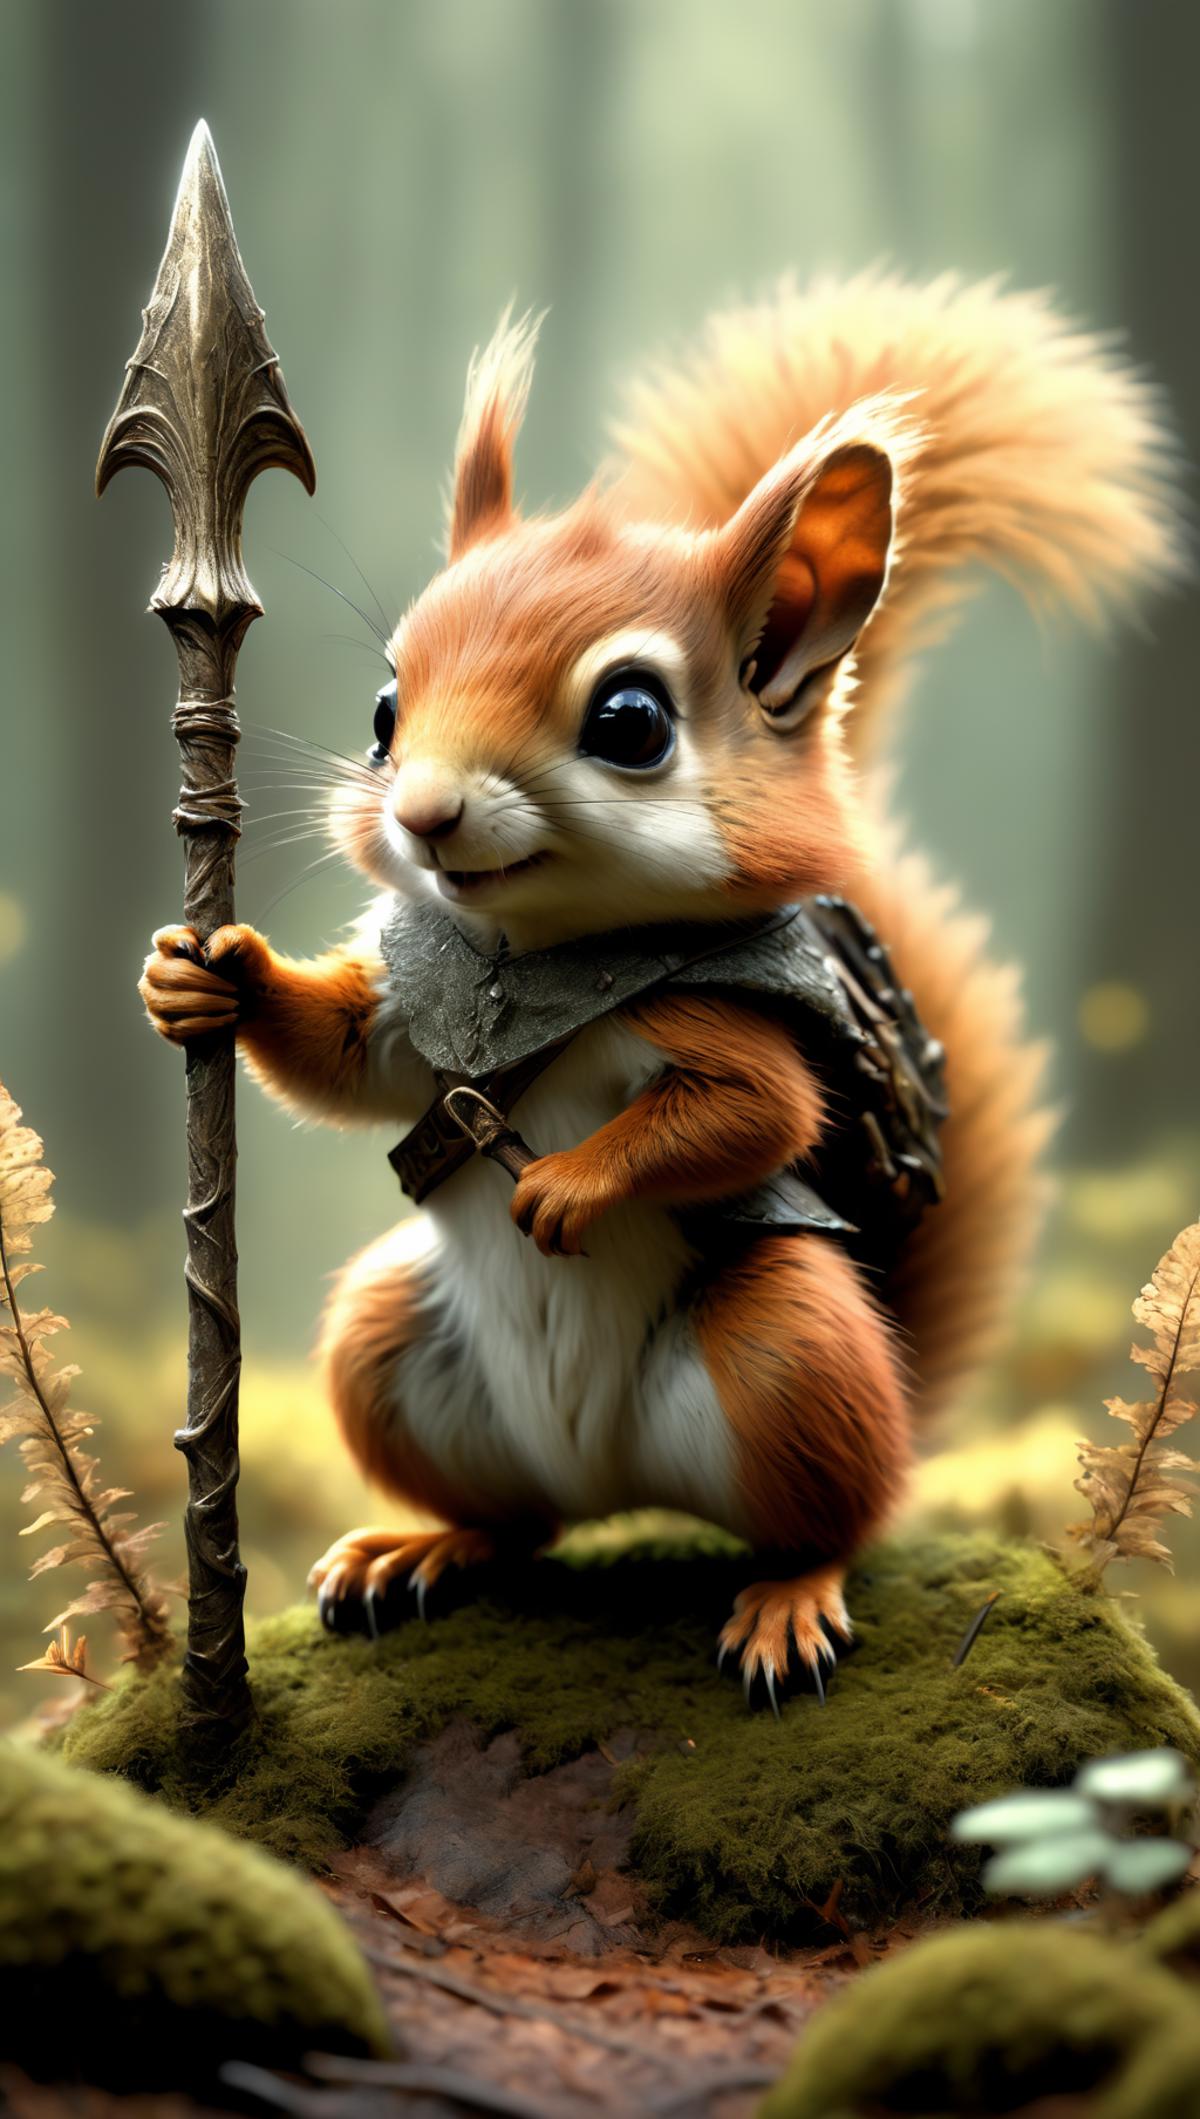 Squirrel with a stick and a backpack.